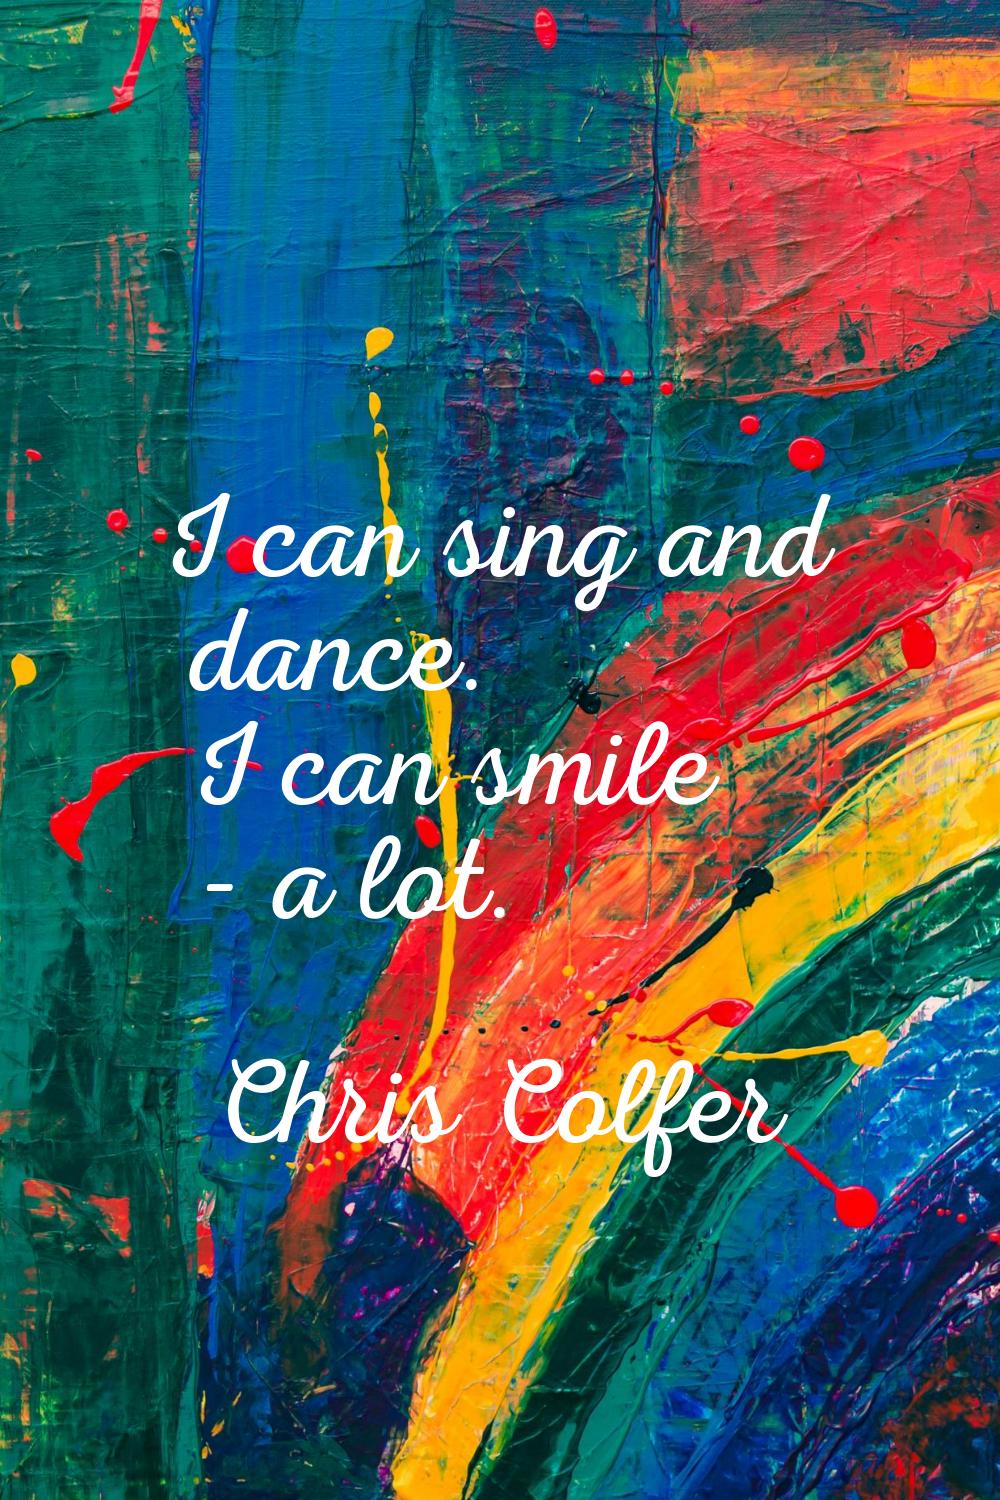 I can sing and dance. I can smile - a lot.